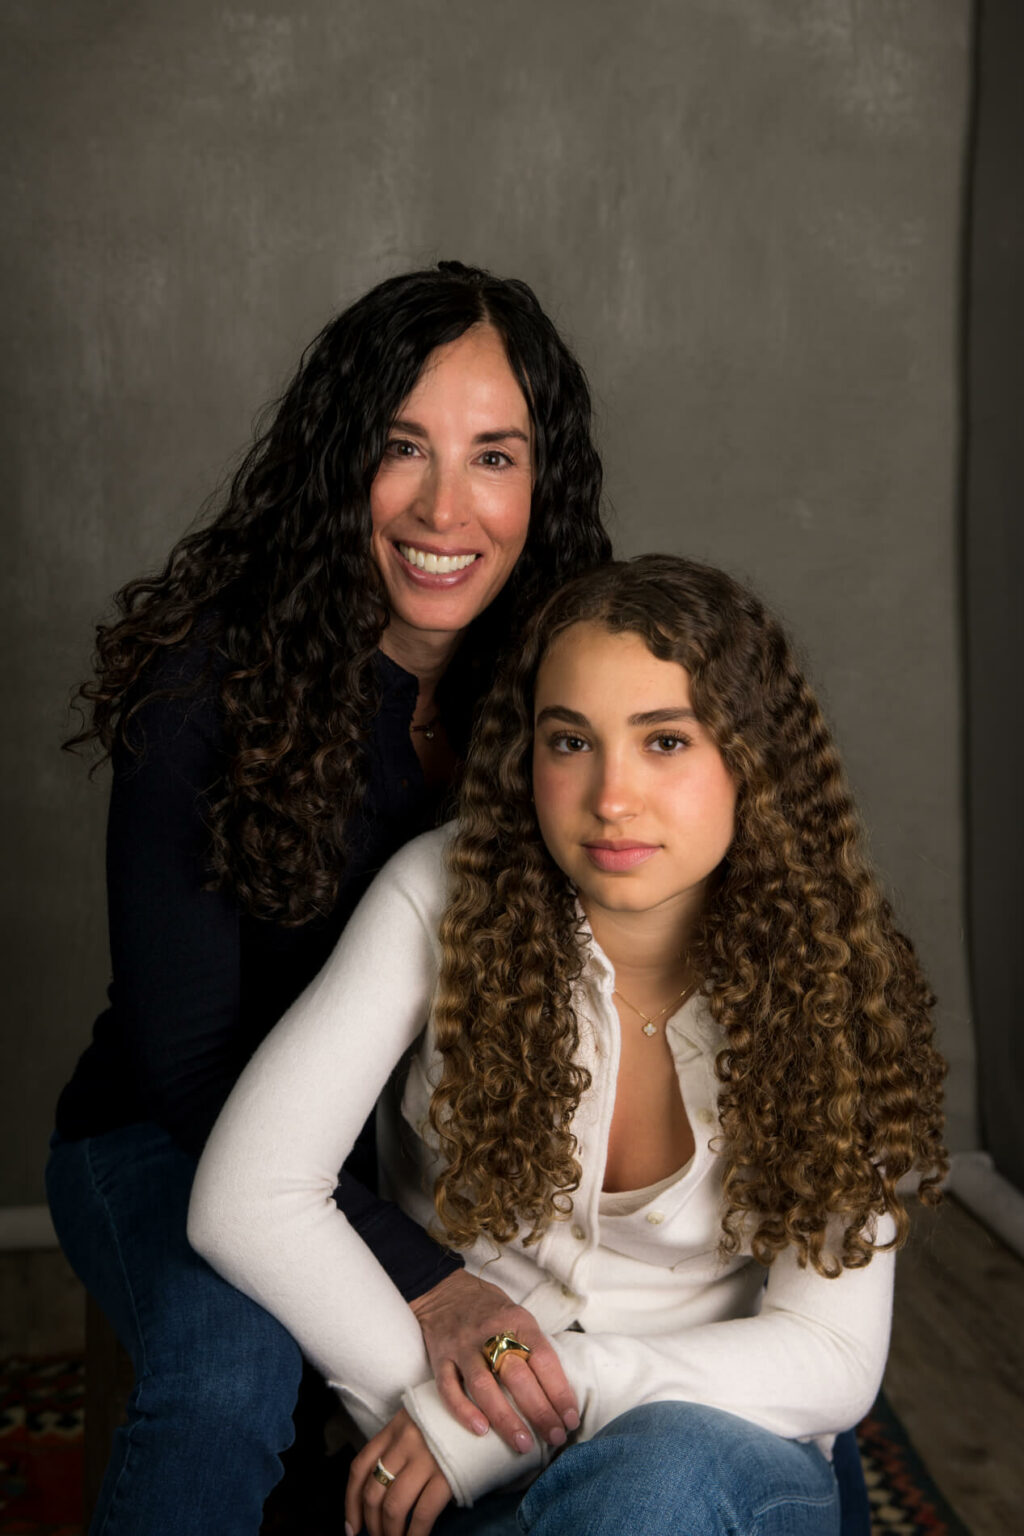 Pose of a mother and daughter portrait